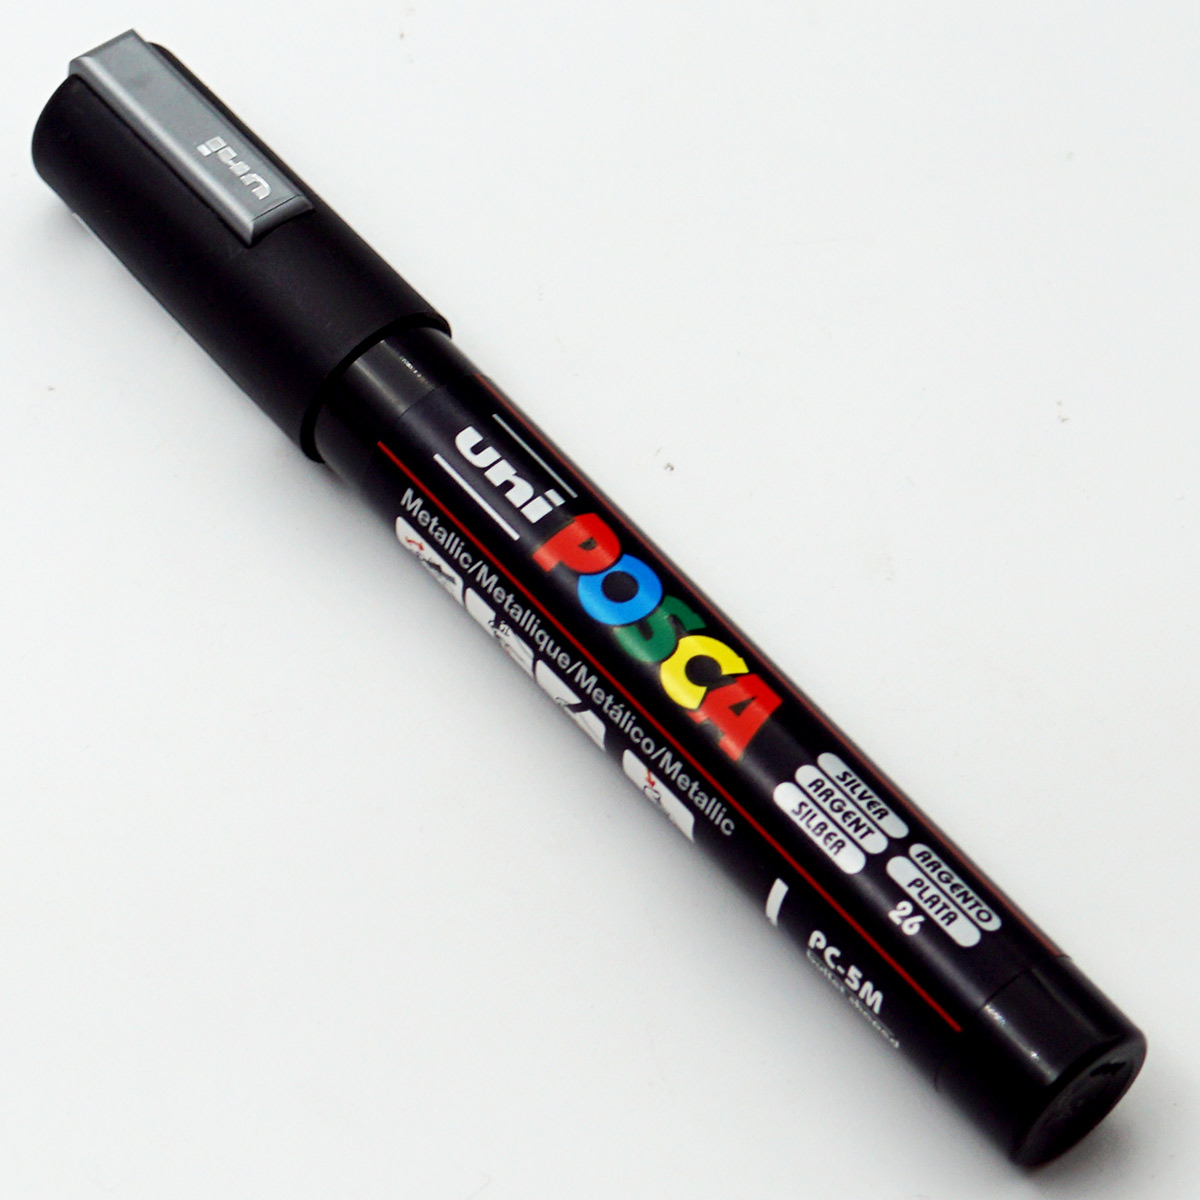 Uniball Posca PC-5M Bullet Medium Tip 1.8 - 2.5mm Silver Color and Water Based Paint Marker SKU24619